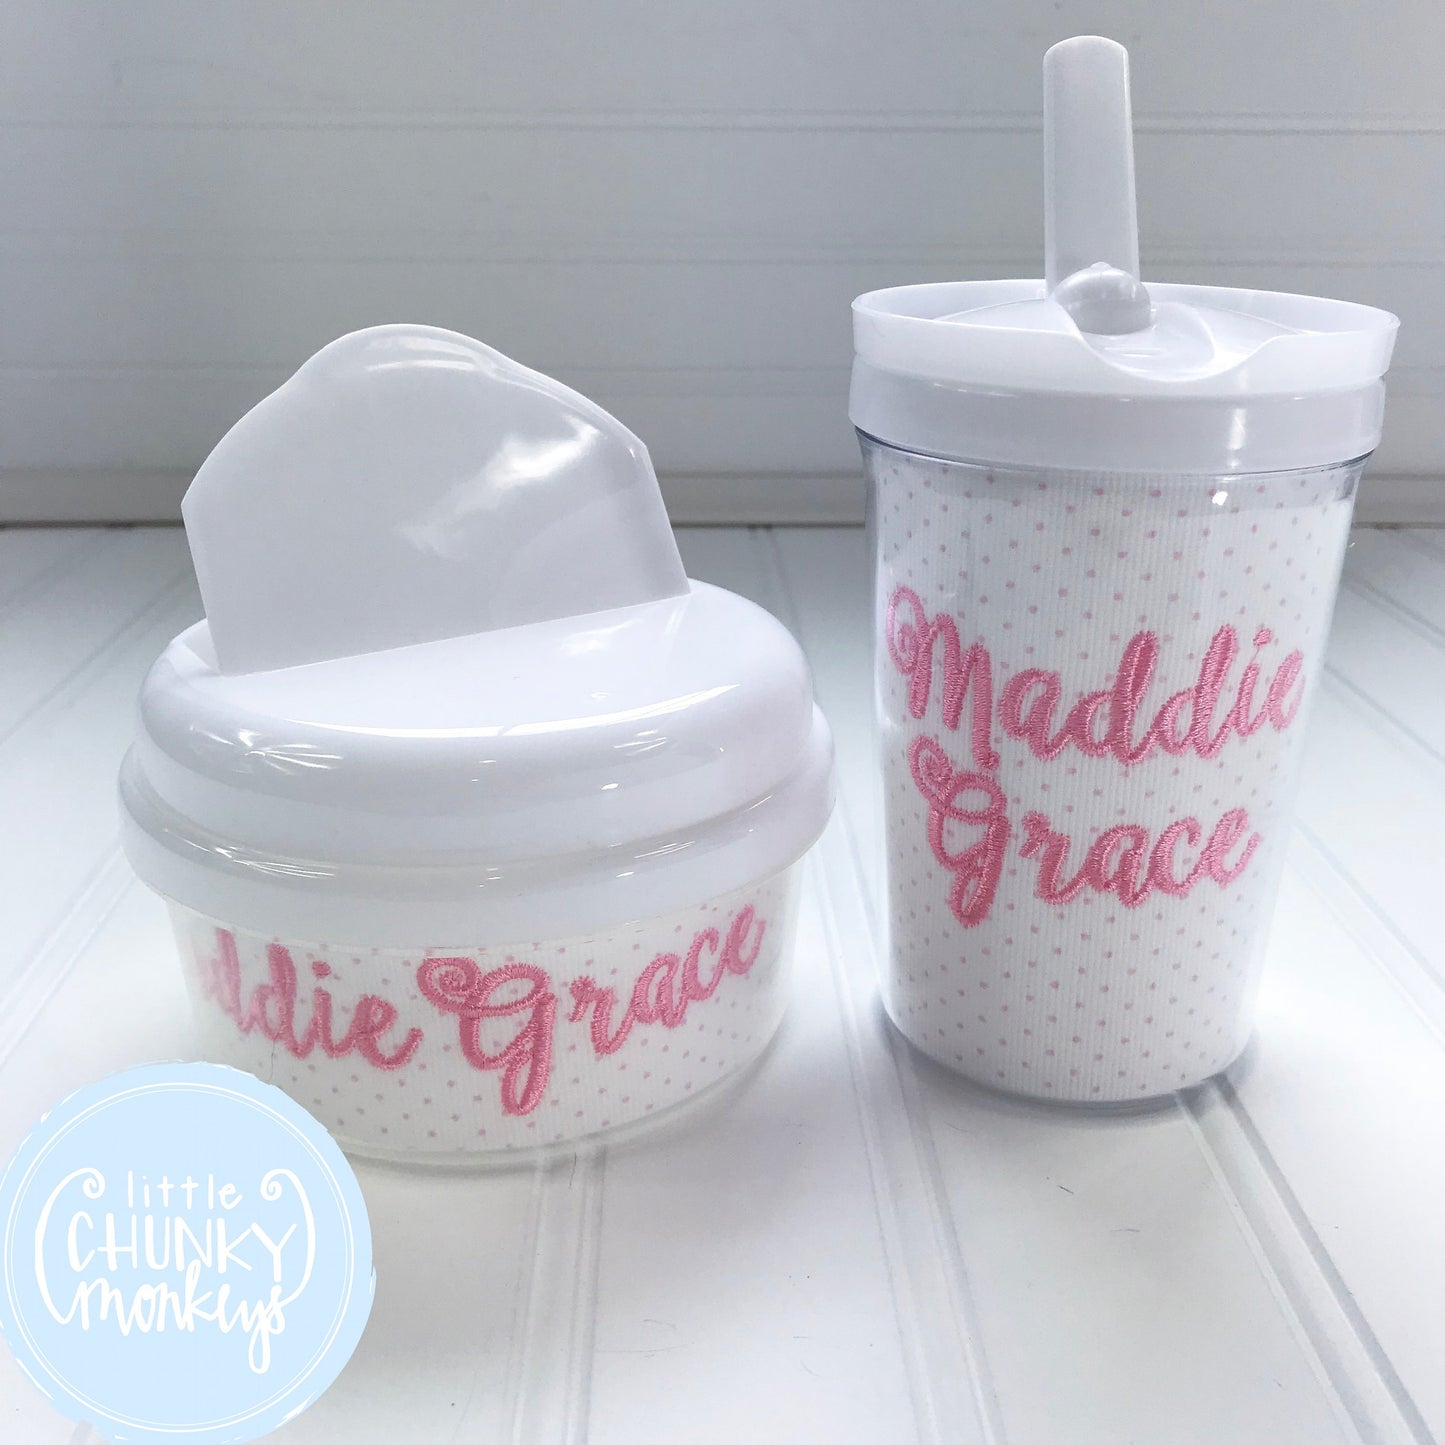 Pink Bitty Dot Snack Bowl with Personalization